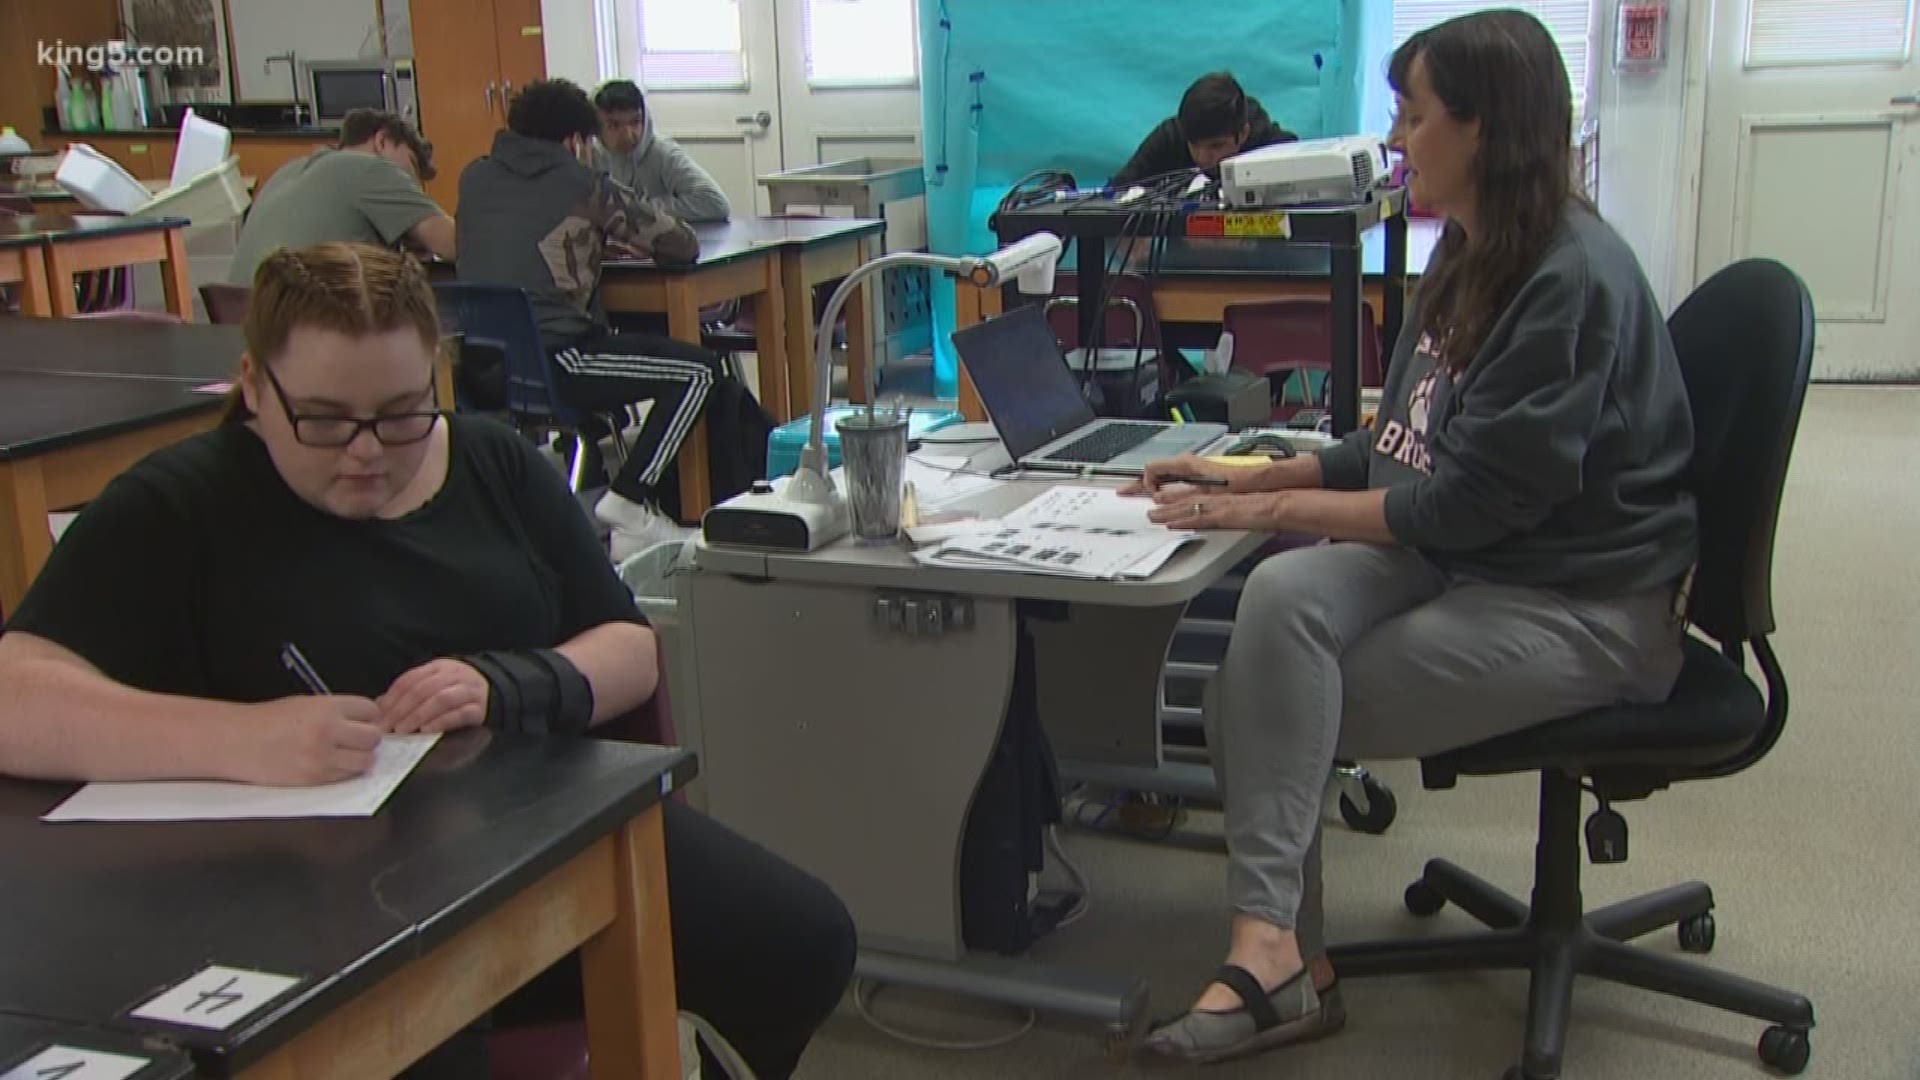 With the school year winding down, students are taking final exams and preparing for the year ahead. In the Everett School District, students are also learning things about themselves they may never have known. The district is evaluating something called "Social Emotional Learning." KING 5's Eric Wilkinson reports.